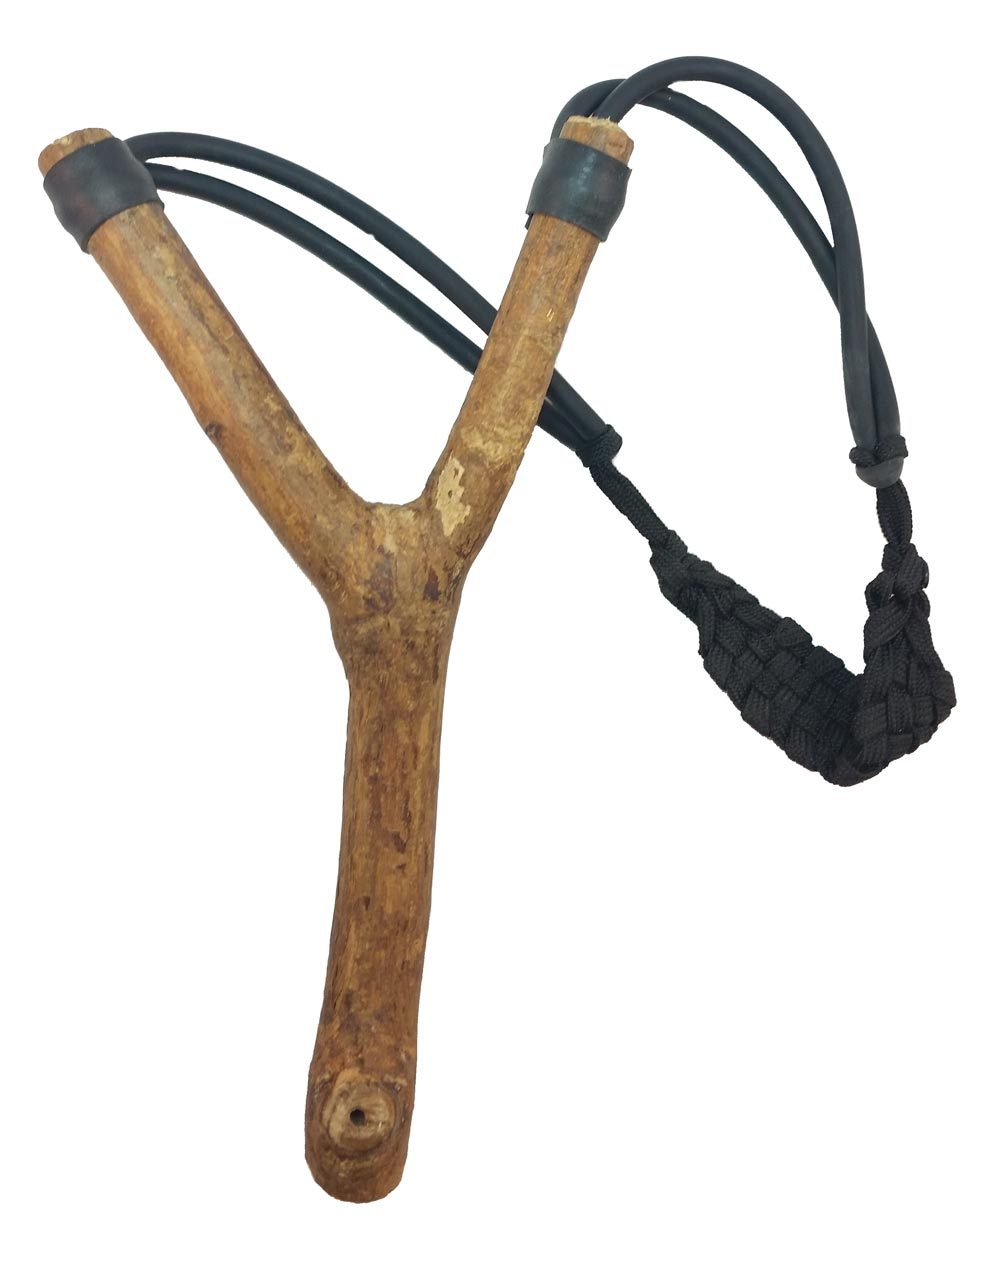 Wazoo black surgical tubing can be used to create a slingshot or trap mechanism